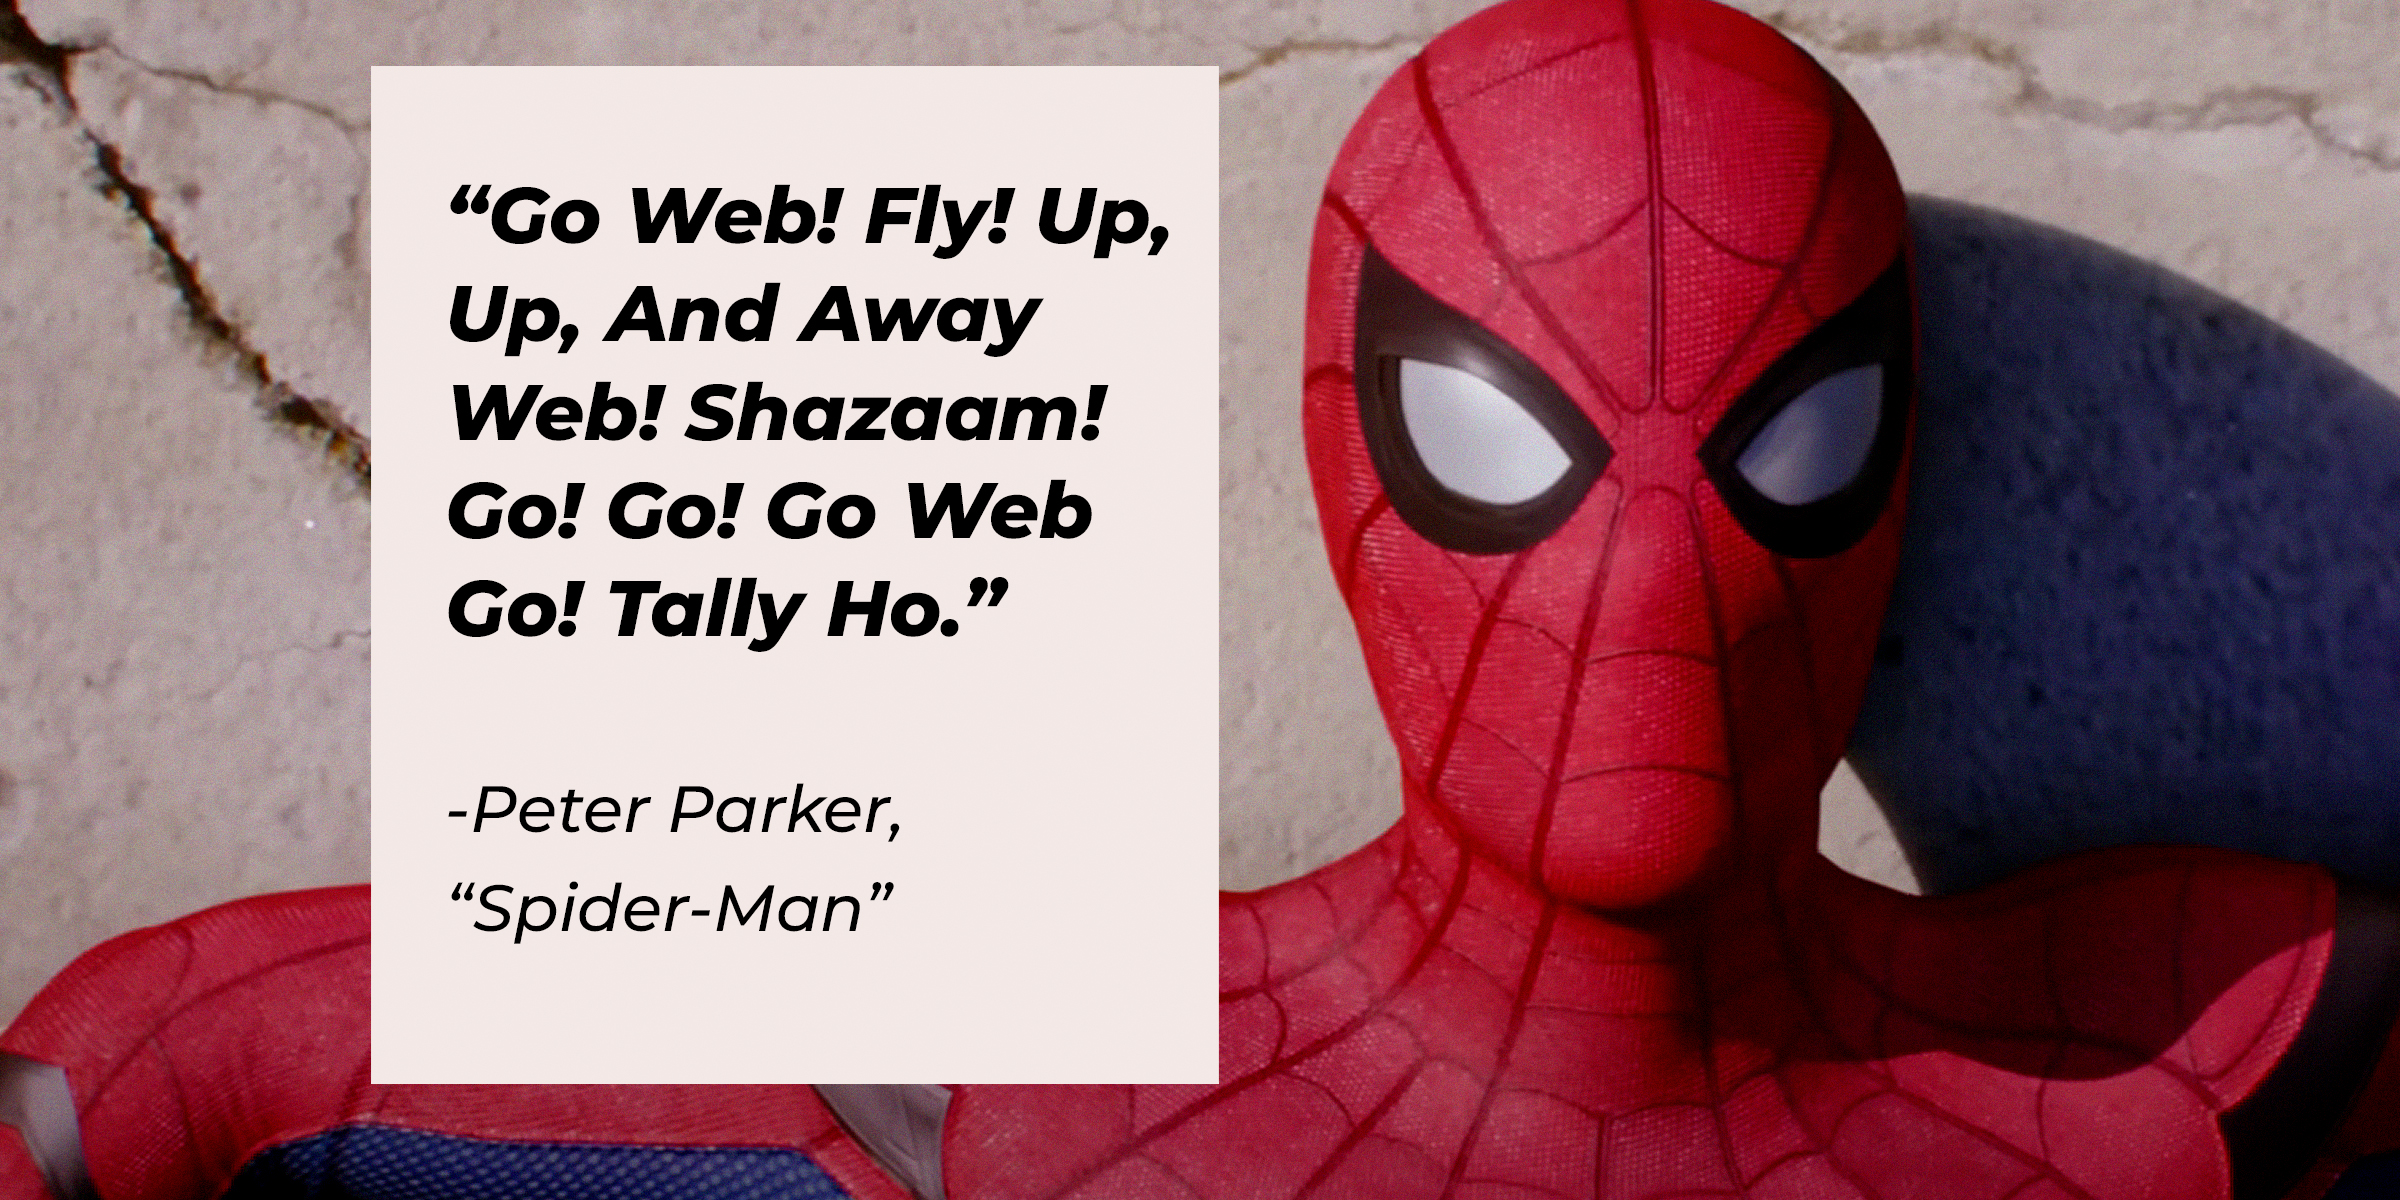 Spider-Man's quote from "Spider-Man:" “Go Web! Fly! Up, Up, And Away Web! Shazaam! Go! Go! Go Web Go! Tally Ho." | Source: Facebook.com/SpiderManMovie